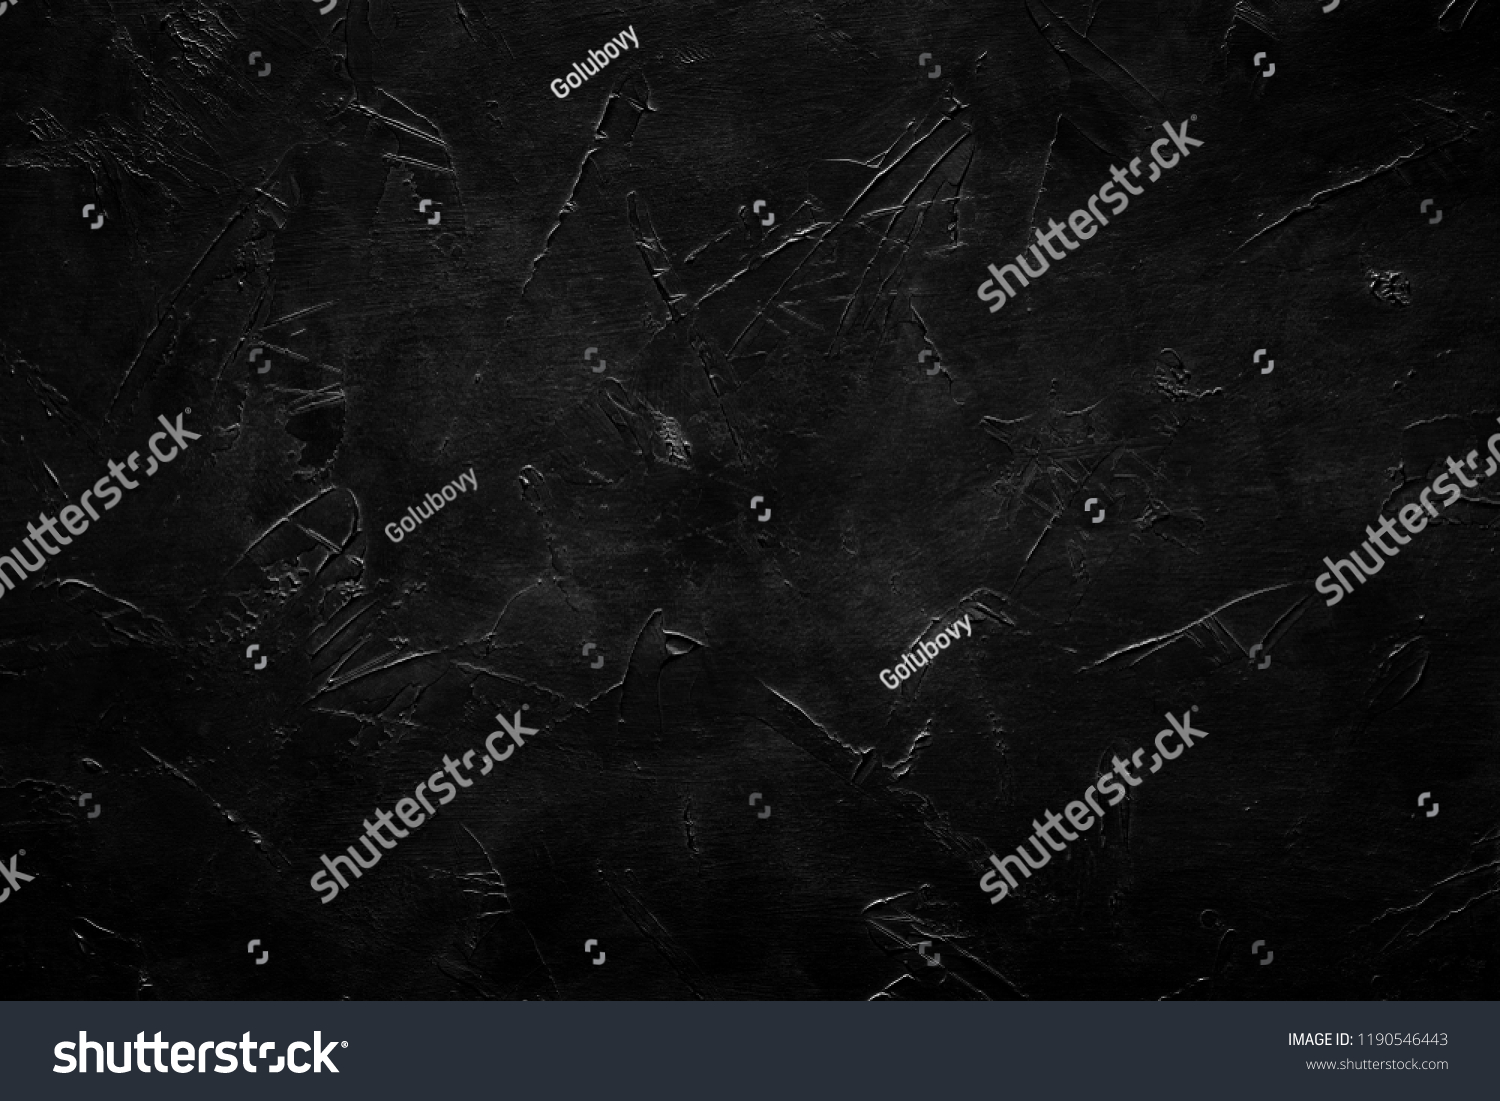 abstract smears and scratches on black background. distressed layer for photo editing. #1190546443